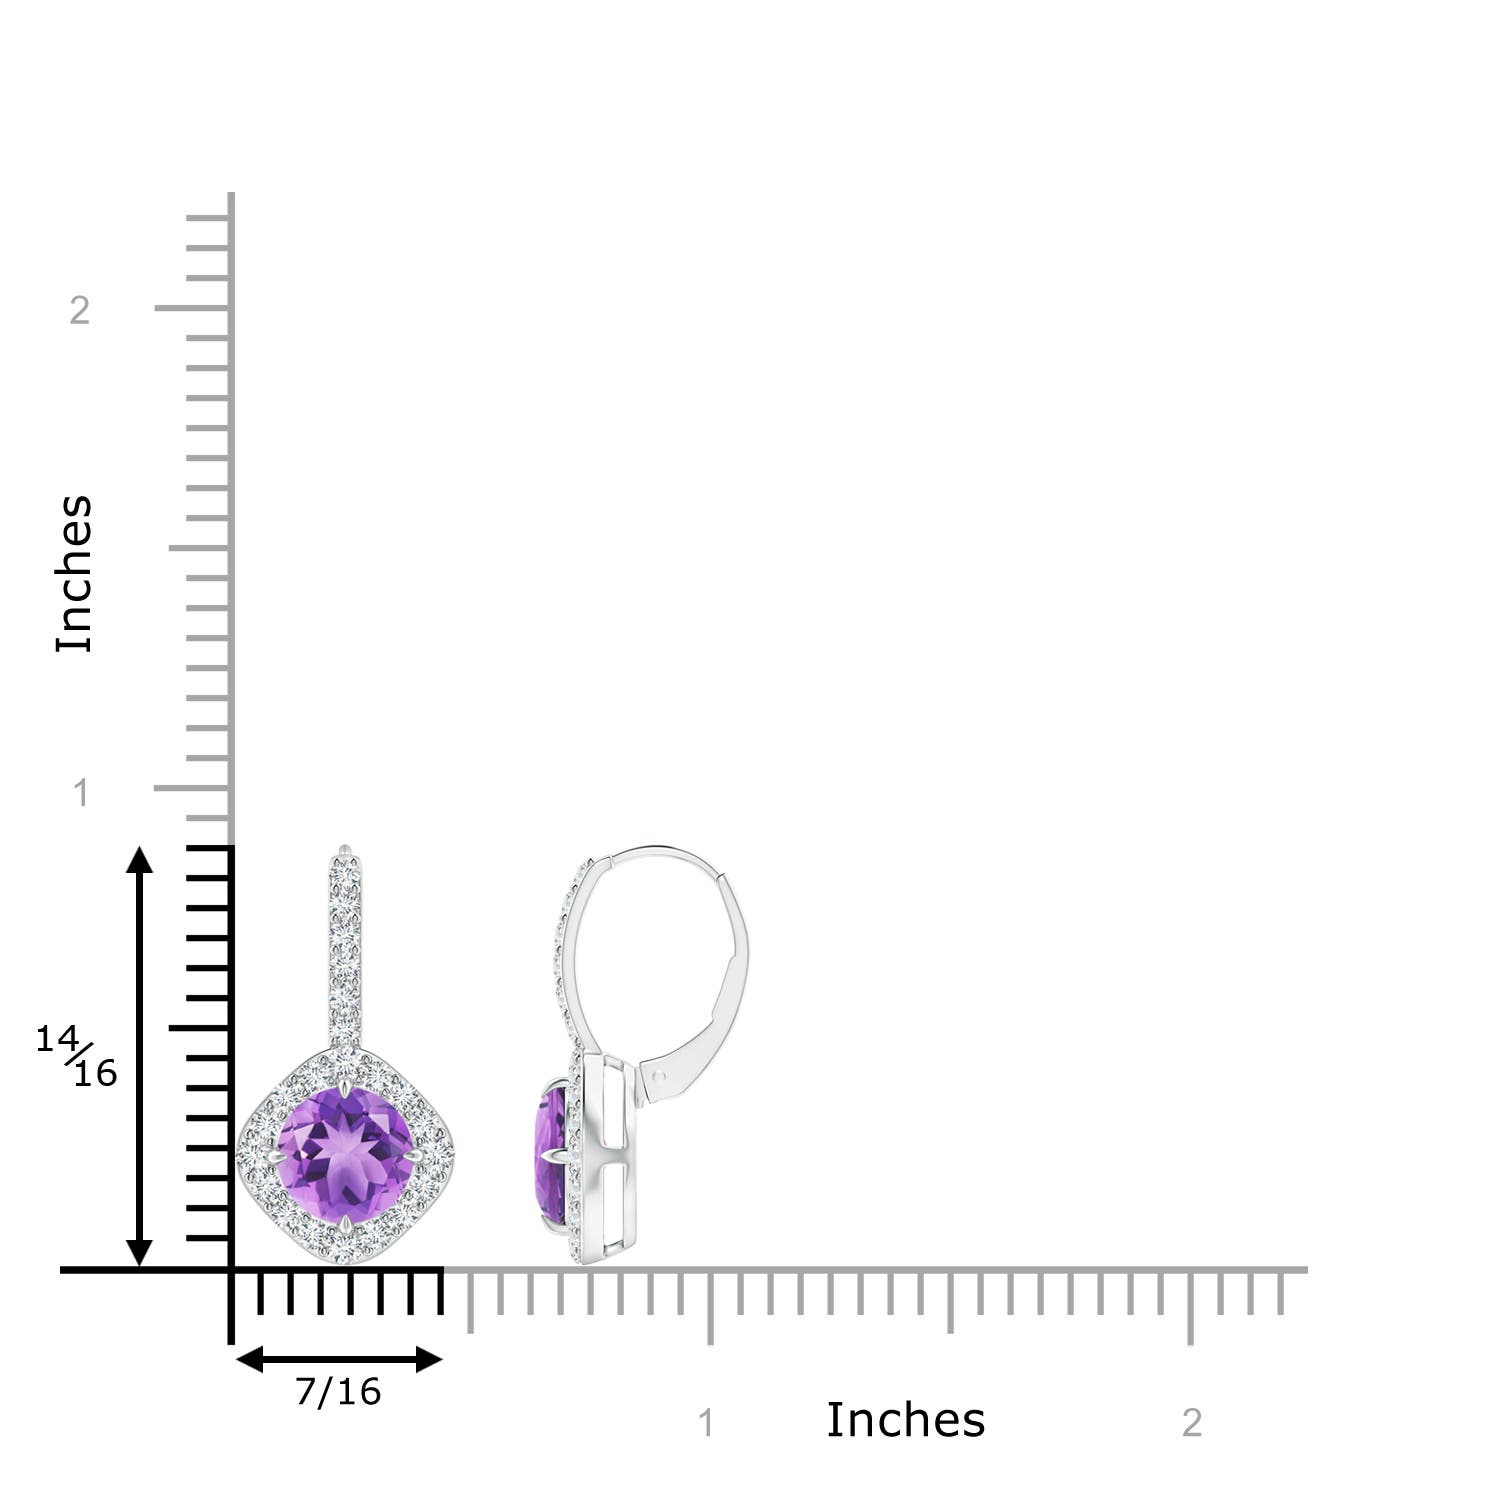 A - Amethyst / 2.85 CT / 14 KT White Gold